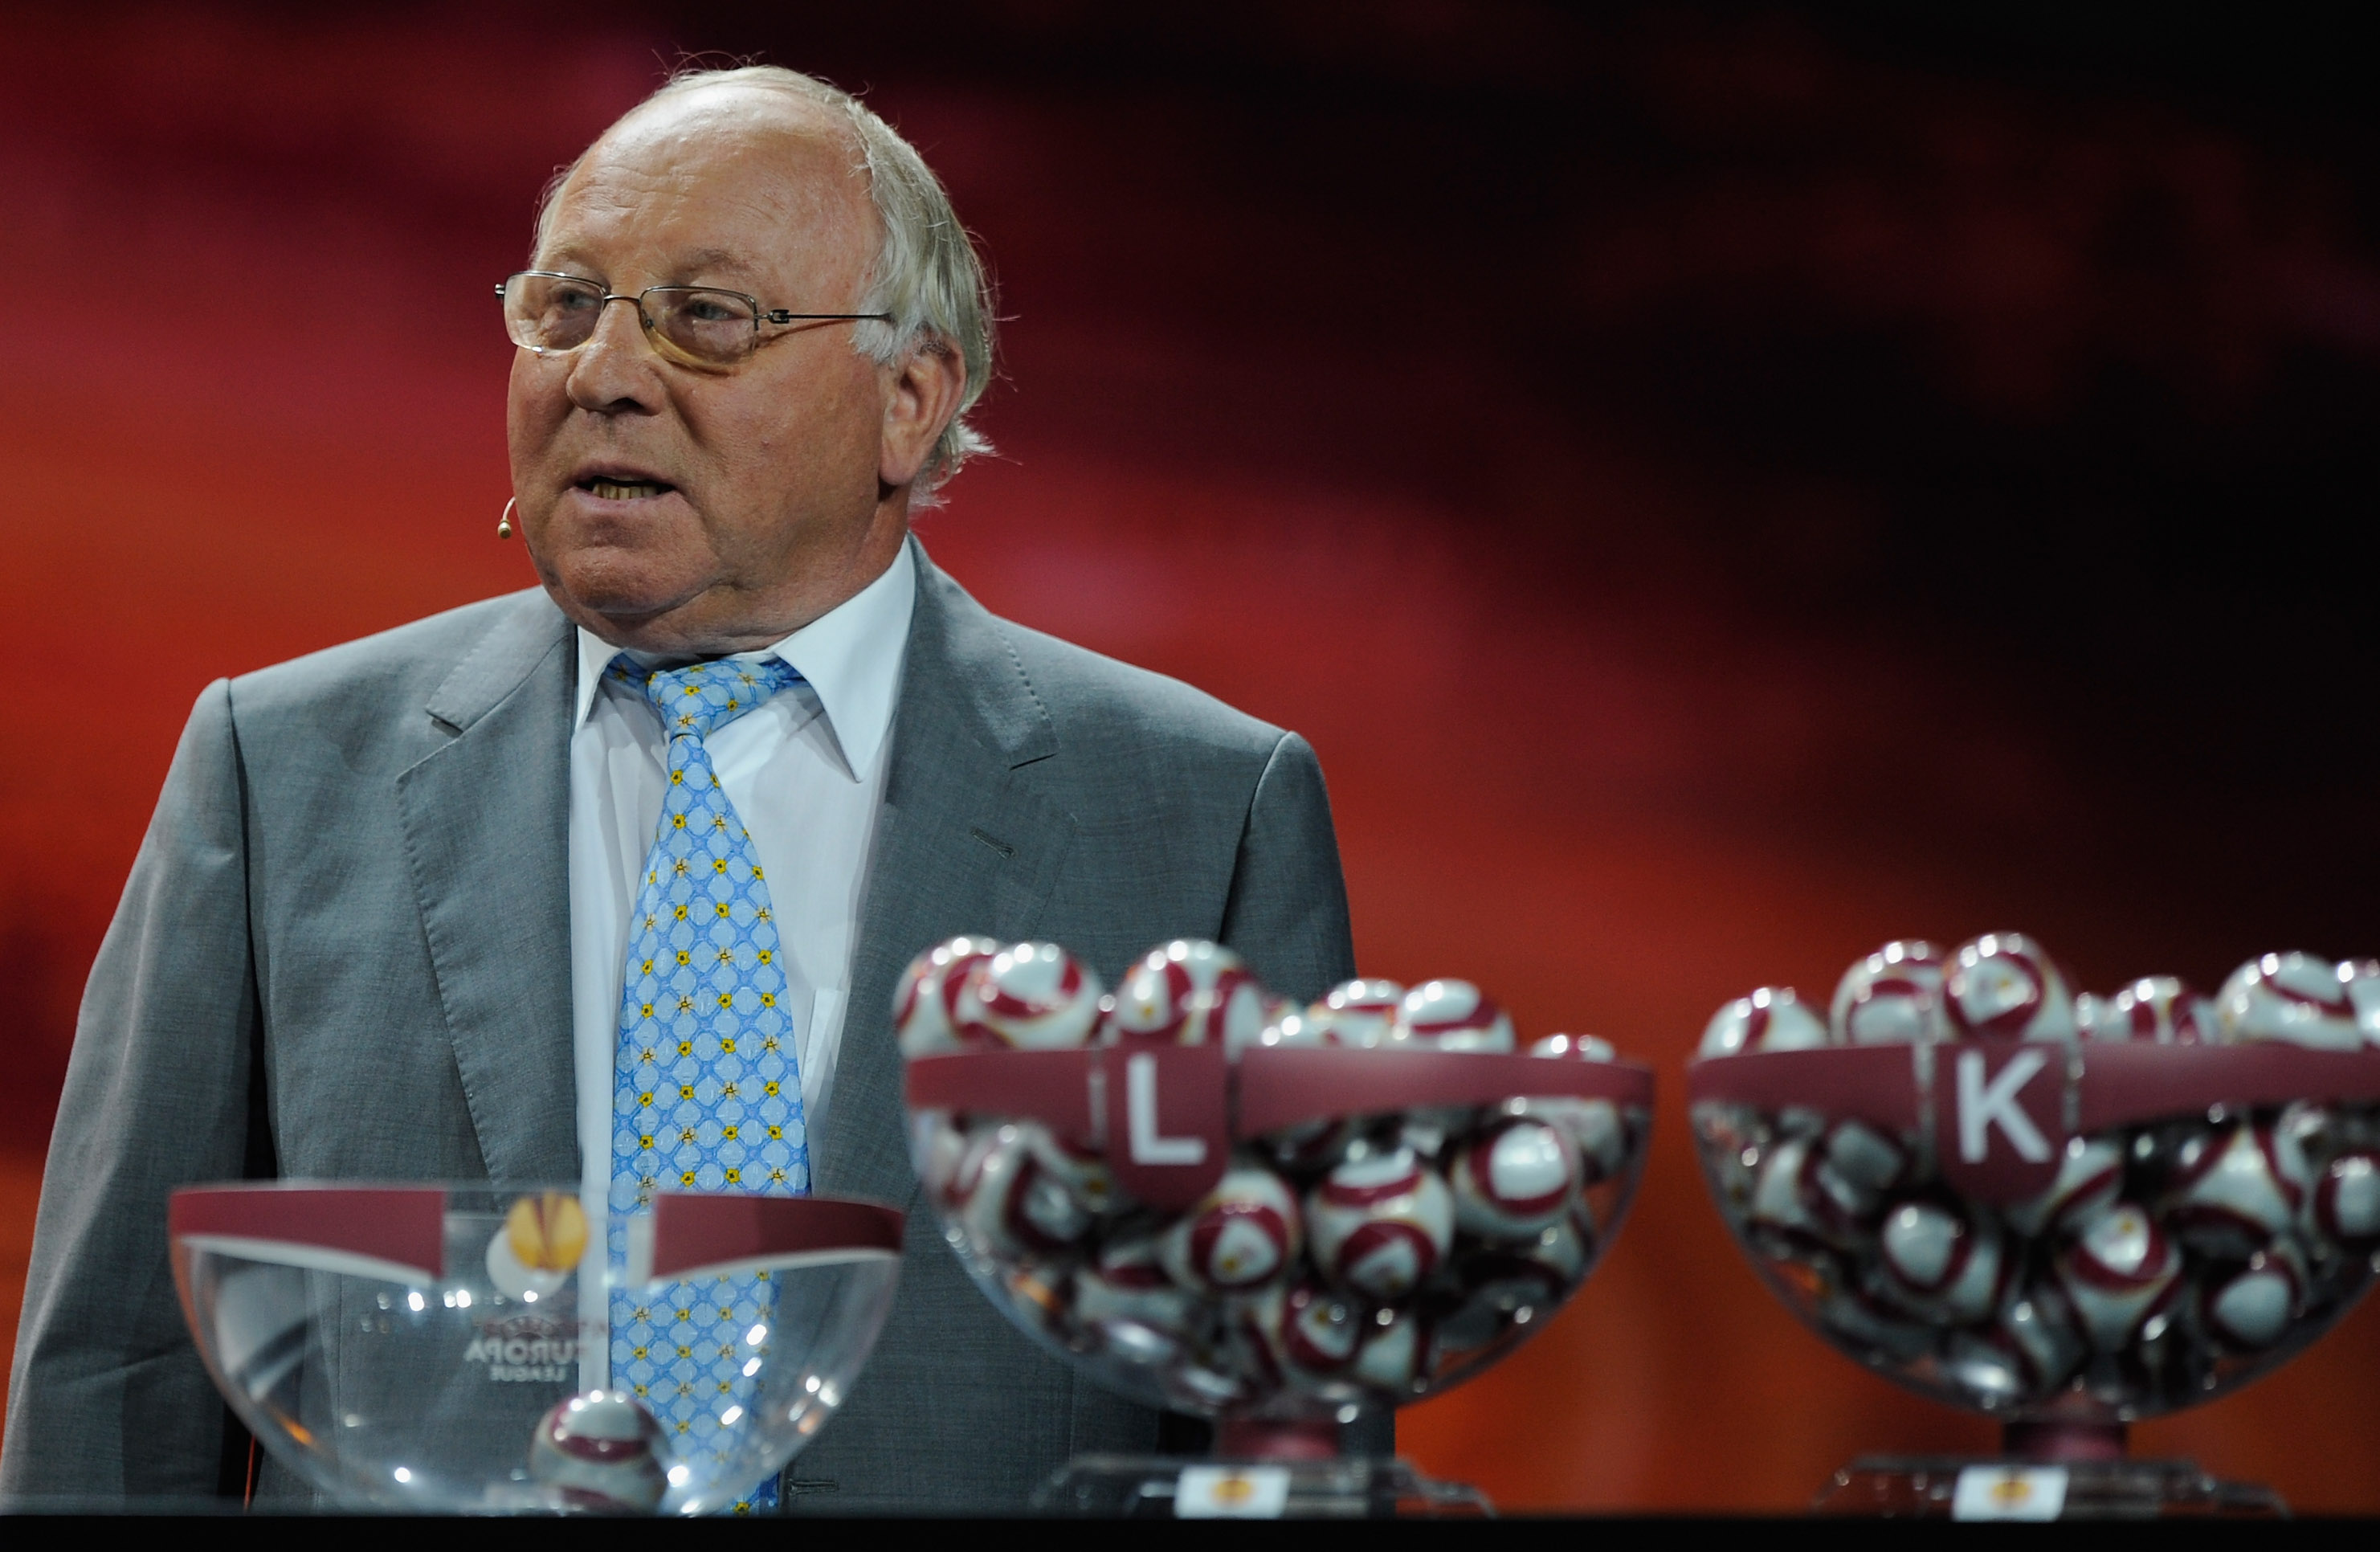 MONACO - AUGUST 28:  Uwe Seeler former German and Werder Bremen player draws the balls during the UEFA Europa League Group Stage Draw at the Grimaldi Forum on August 28, 2009 in Monaco, Monaco.  (Photo by Laurence Griffiths/Getty Images)